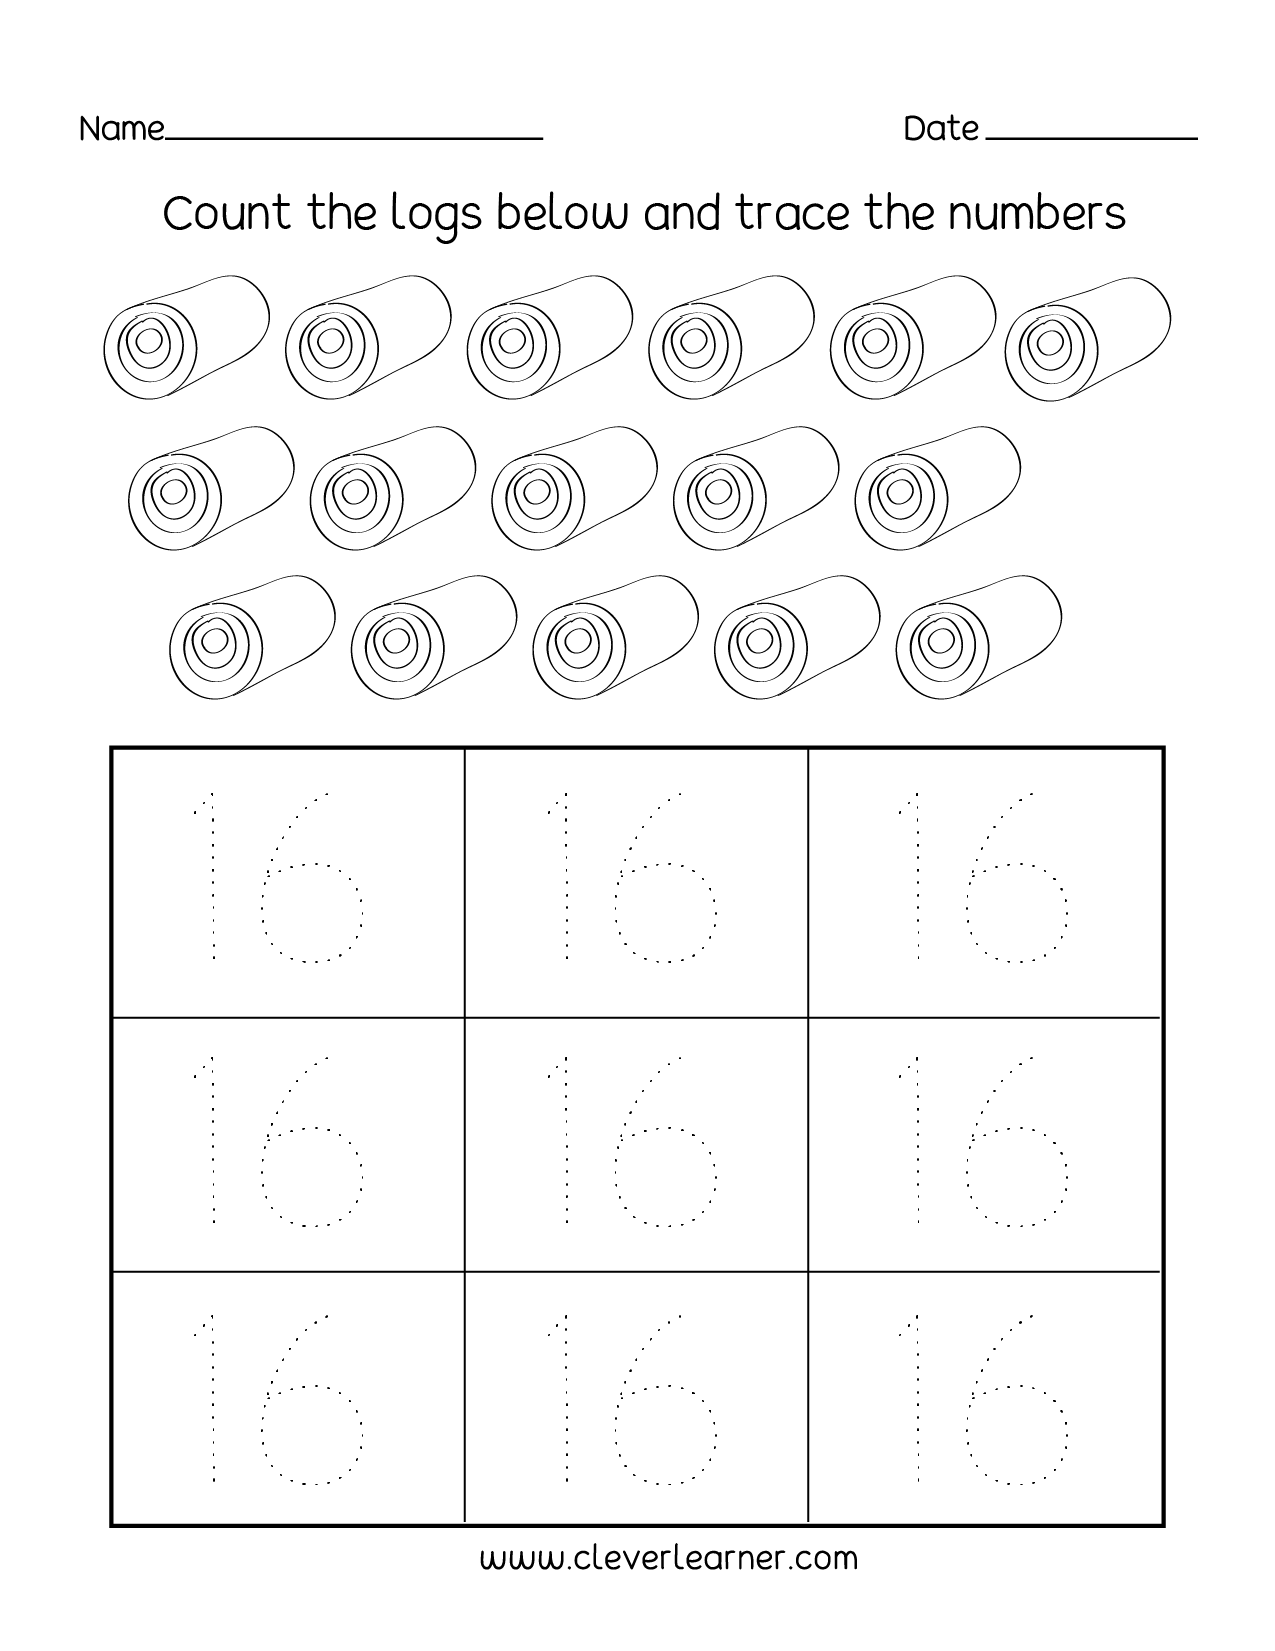 kindergarten-number-line-worksheets-pin-by-clever-learner-on-addition-of-numbers-in-2020